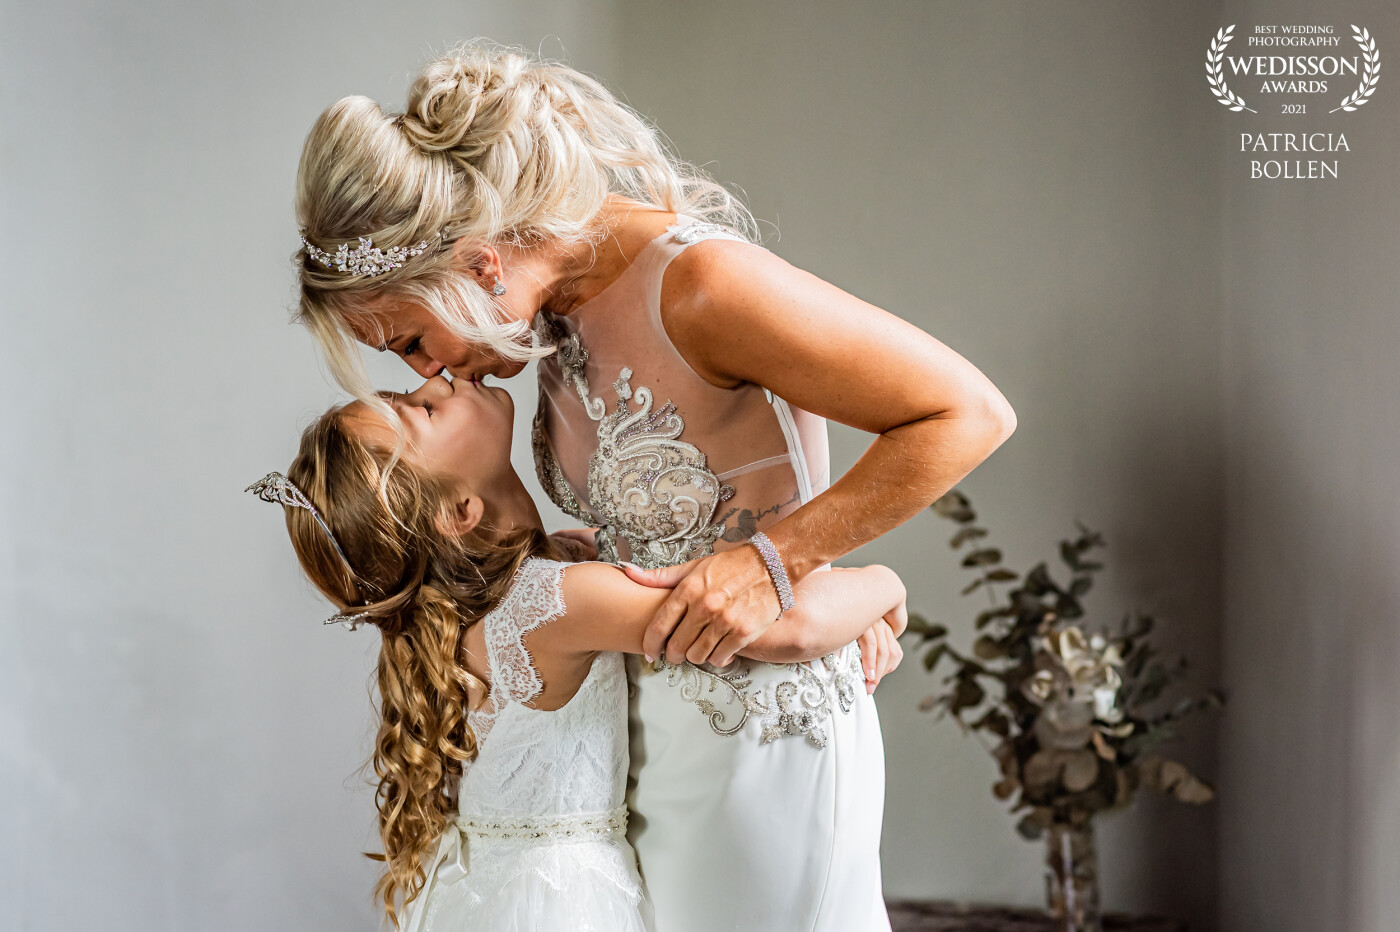 I shot this wonderful moment between mother and daughter at the first look. The wedding took place at Slot Moermond, Renesse, Holland.